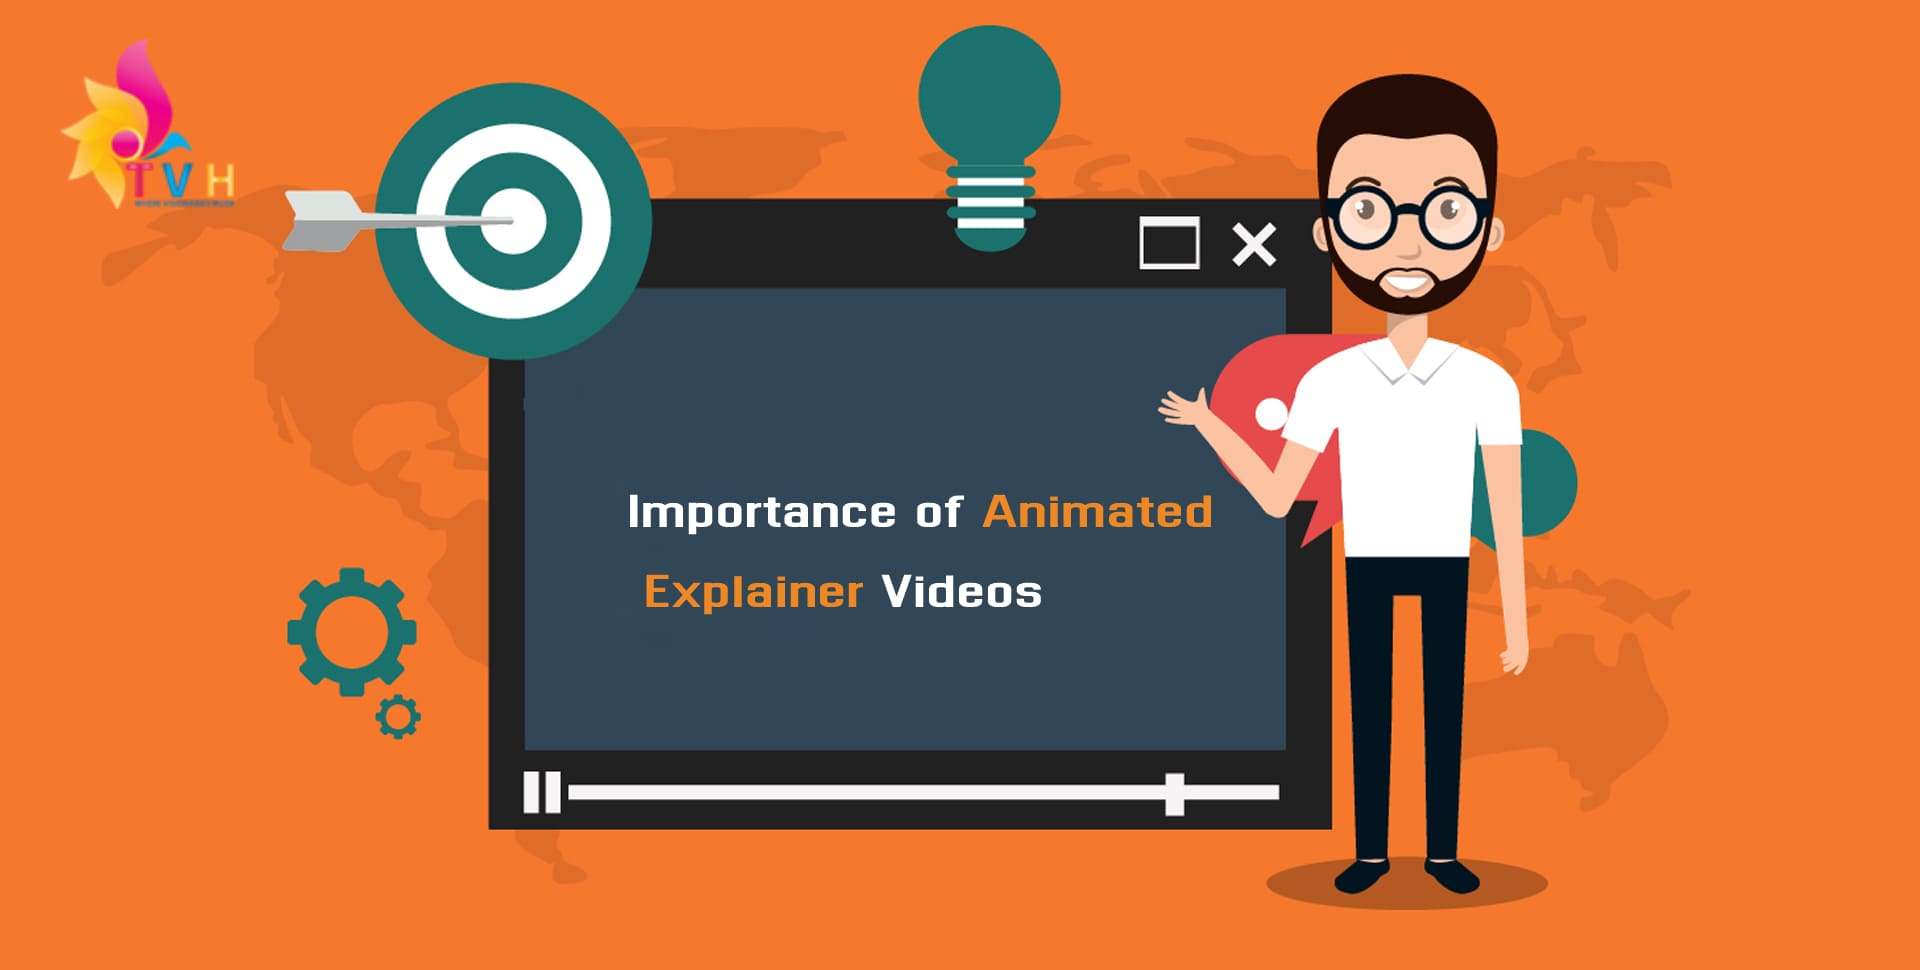 Importance of Animated Explainer Videos